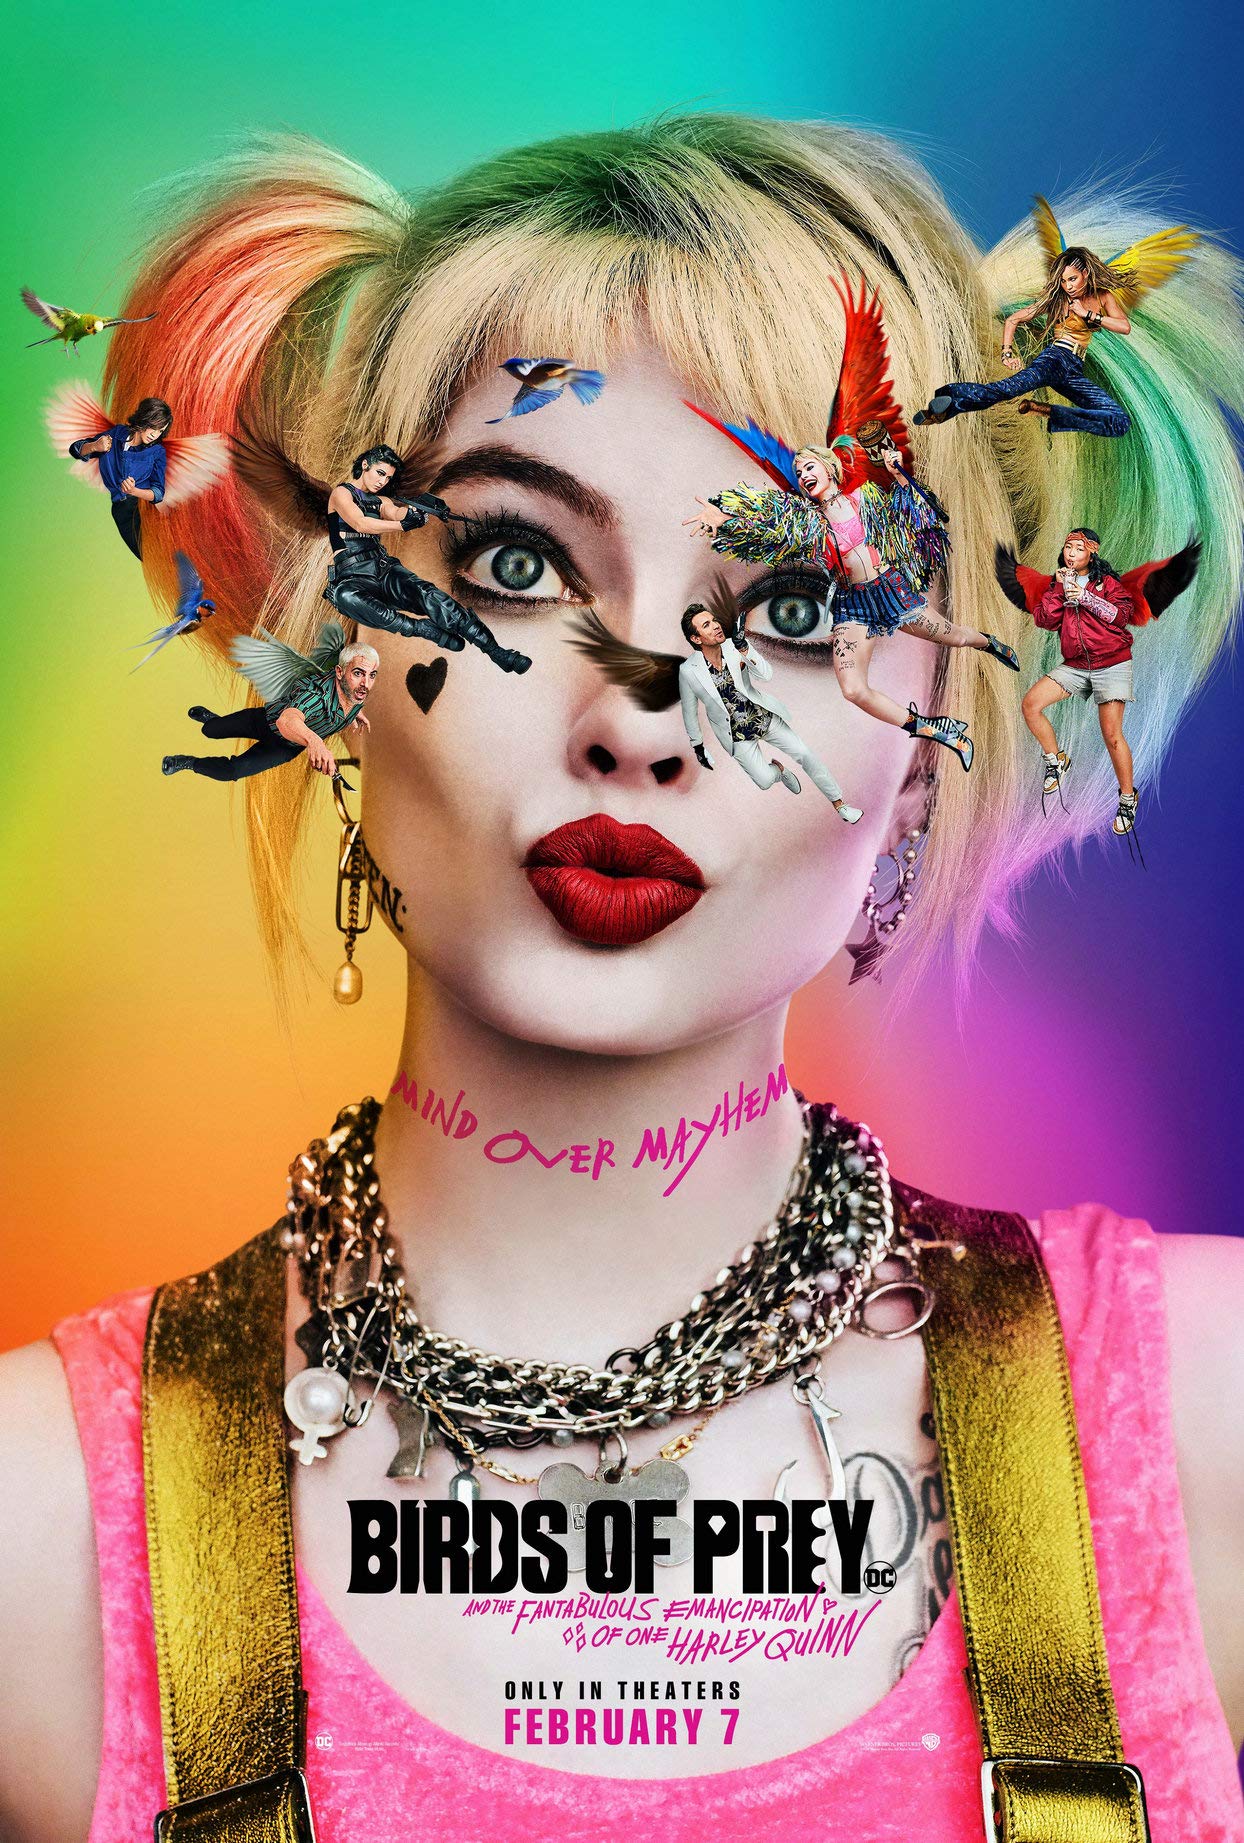 Birds of Prey (And the Fantabulous Emancipation of One Harley Quinn